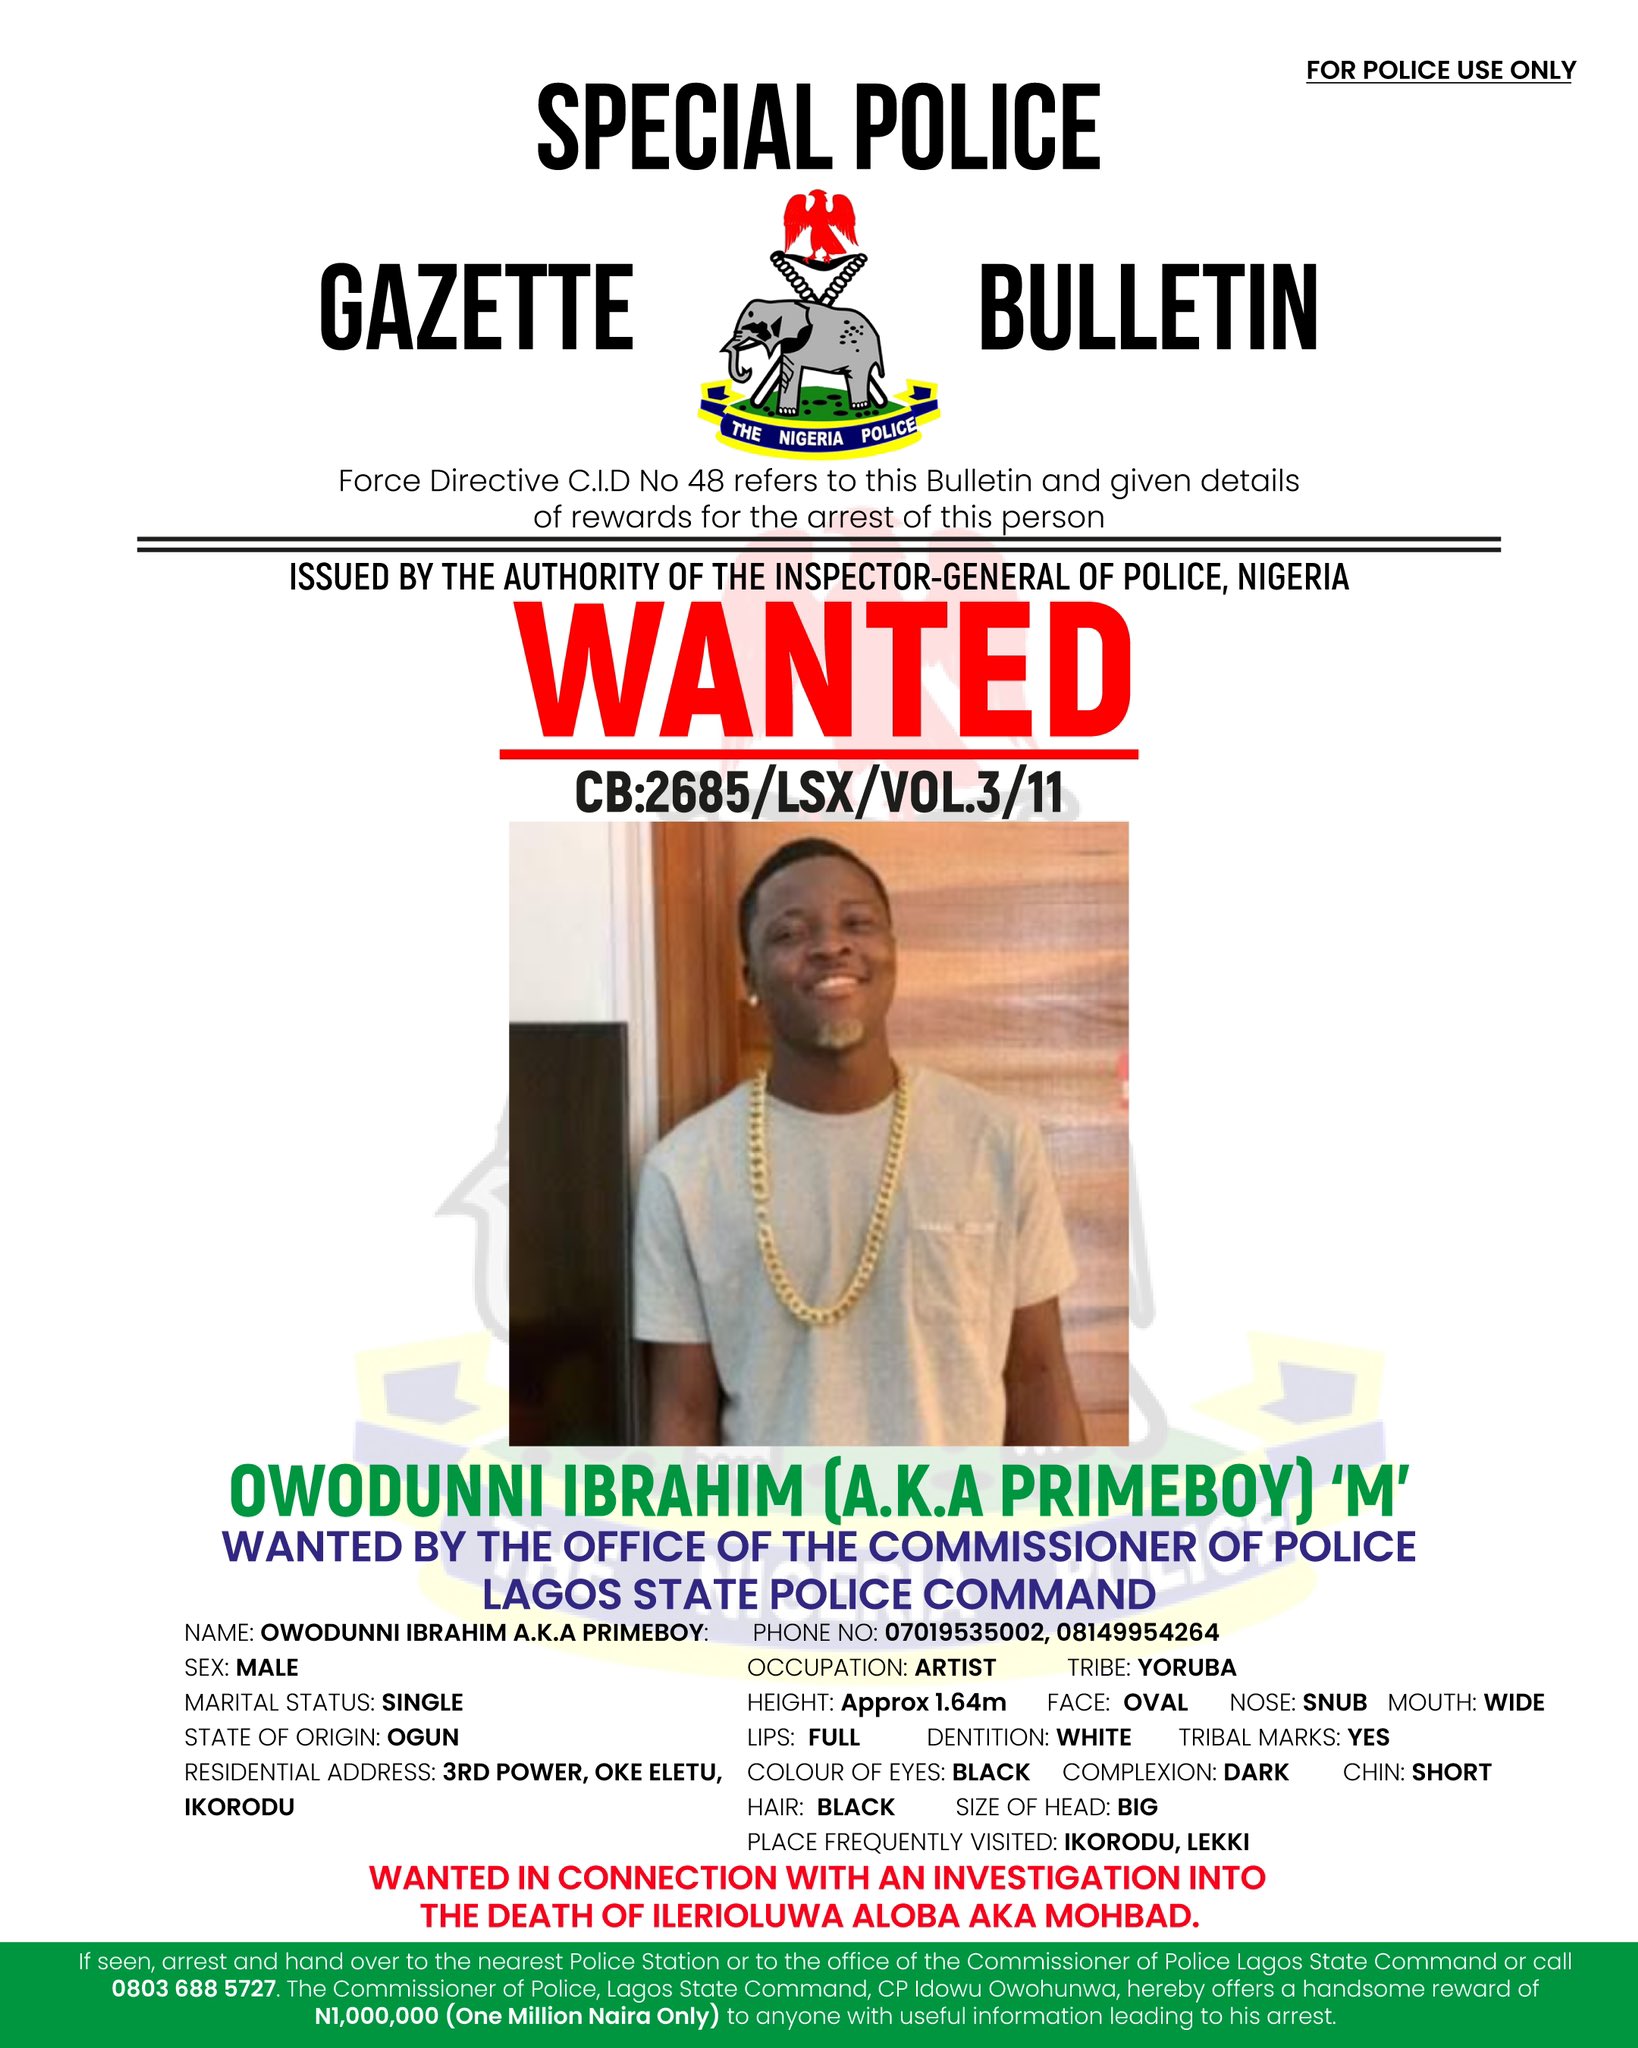 MOHBAD: Police declare Primeboy wanted, place N1m reward